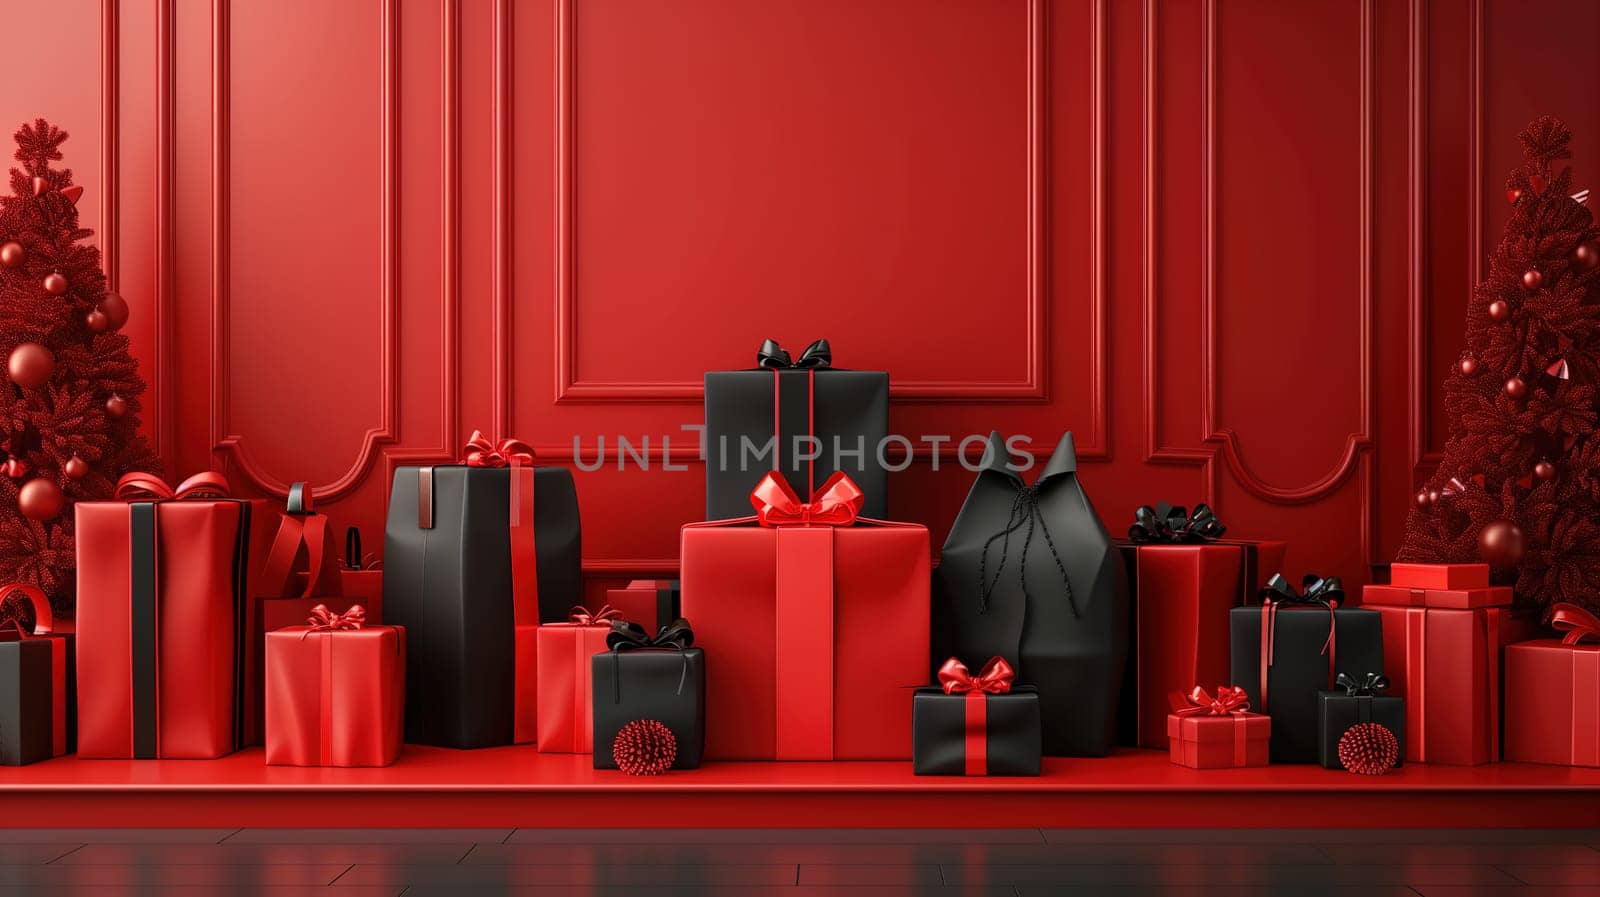 A group of variously sized and wrapped presents sitting neatly on top of a vibrant red floor, creating a festive and colorful scene for a sale or Black Friday event.